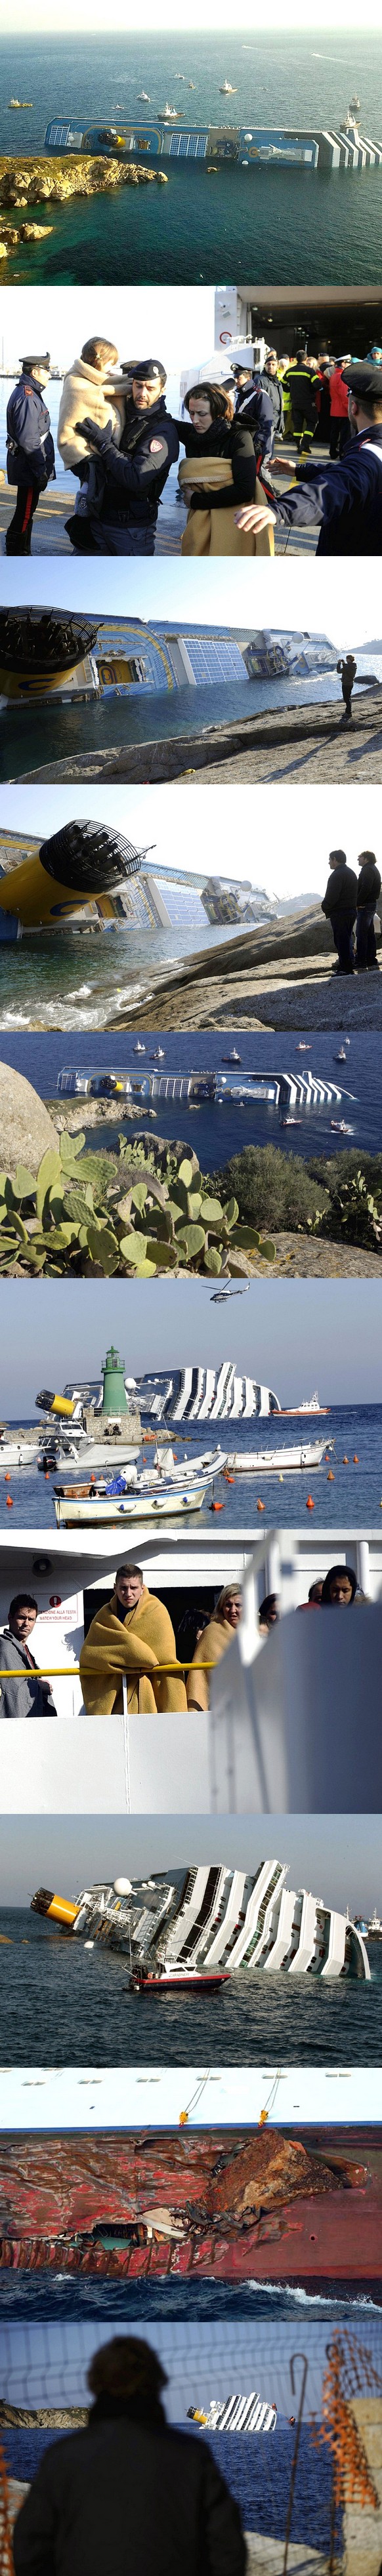 10:37AM GMT 14 Jan 2012
A large Italian cruise ship carrying more than 4,000 people ran aground on a sandbar off the west coast of Italy on Friday night with at least three people confirmed killed in the incident.
The some 3,200 passengers and 1,023 crew on board the ship, the Costa Concordia, were being evacuated by lifeboats, helicopters and ot